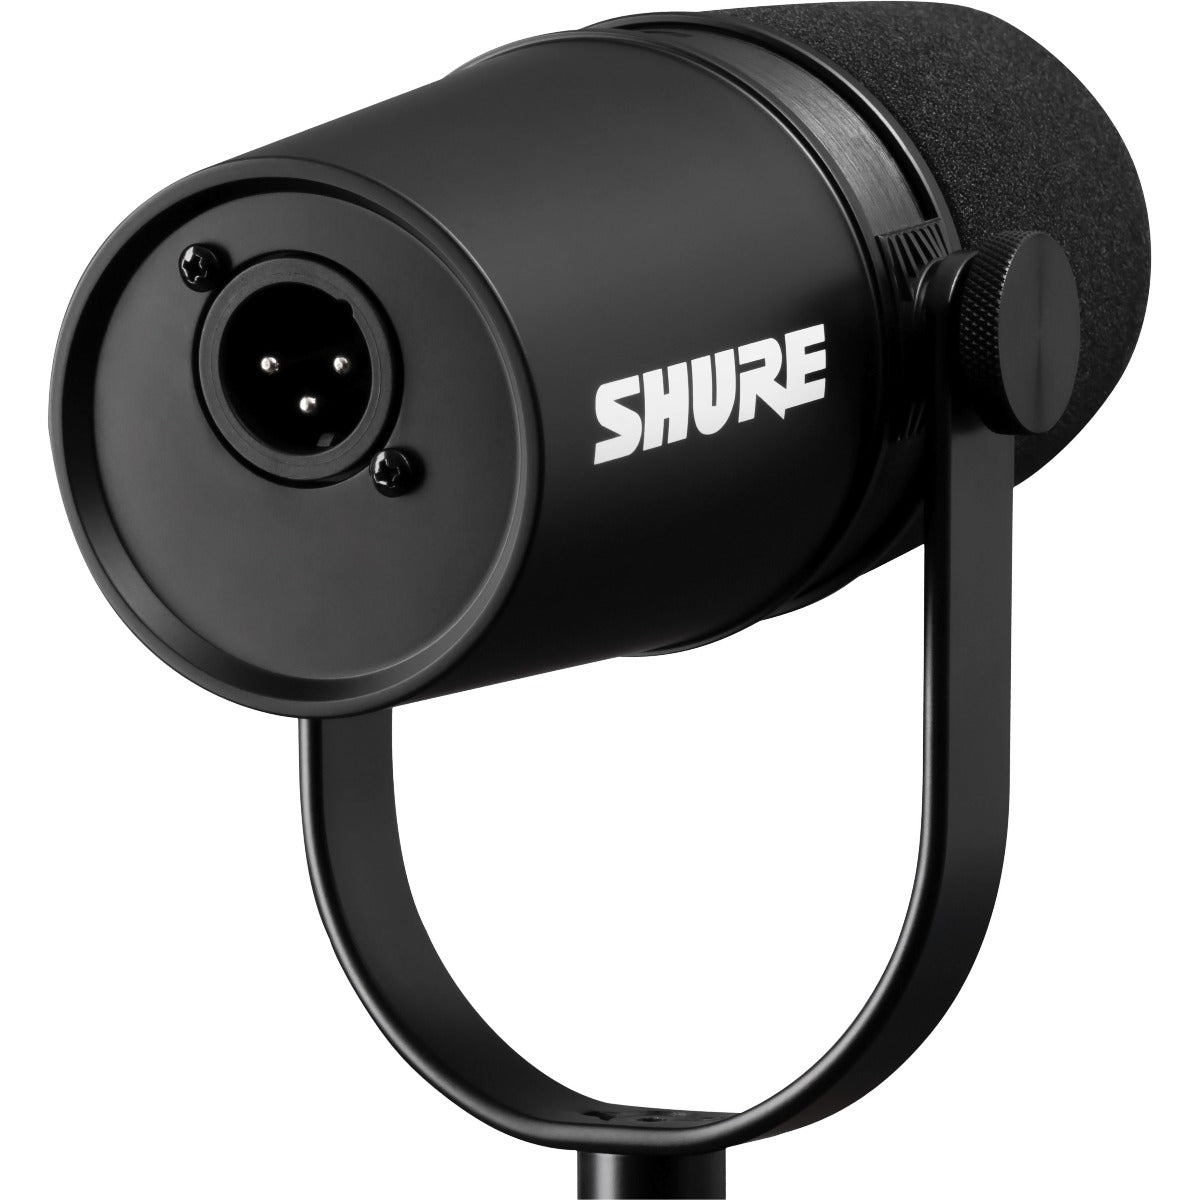  Shure MV7X XLR Podcast Microphone - Pro Quality Dynamic Mic for  Podcasting & Vocal Recording, Voice-Isolating Technology, All Metal  Construction, Mic Stand Compatible, Optimized Frequency - Black : Musical  Instruments